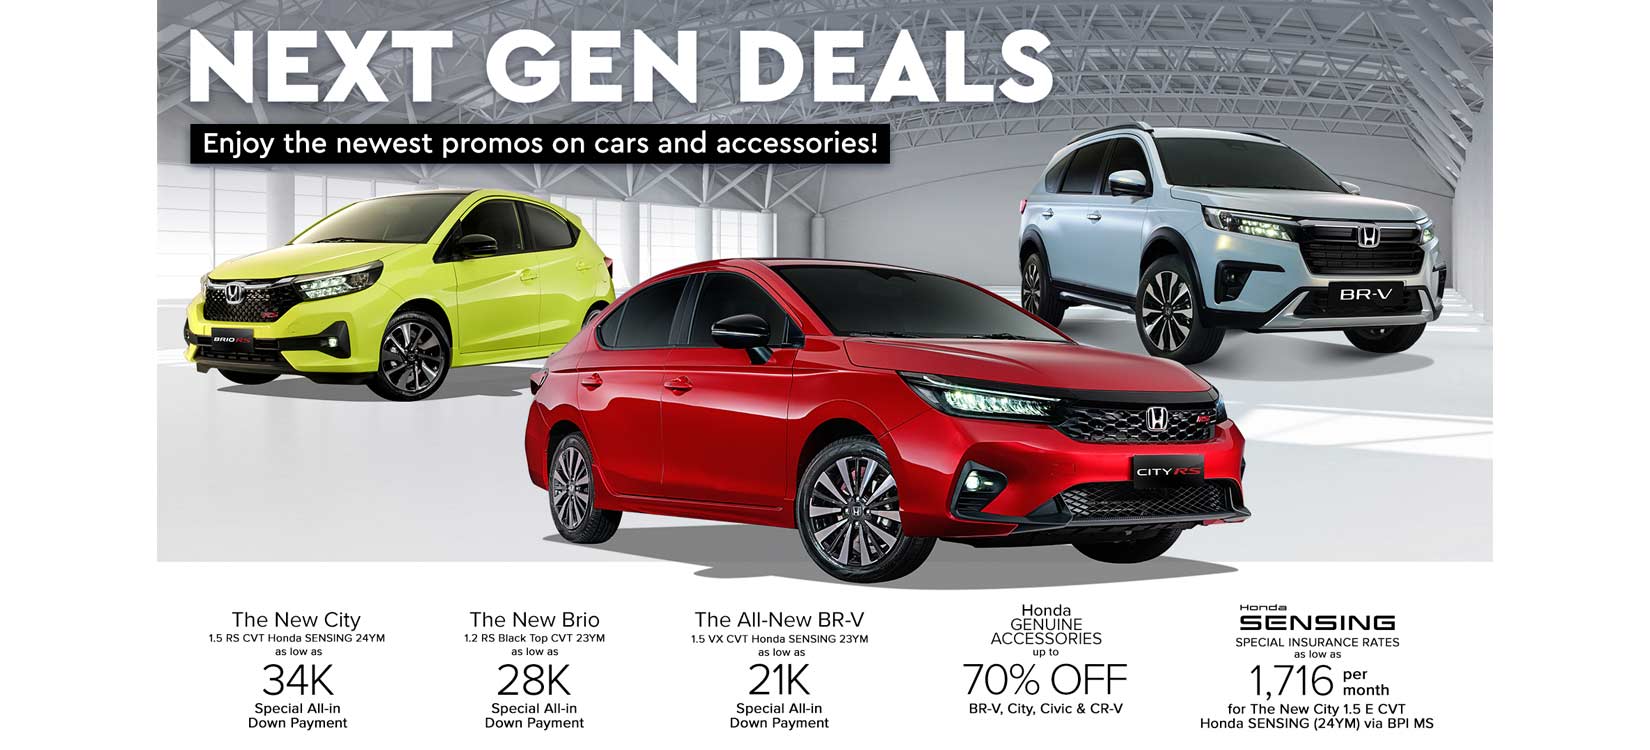 Honda Cars PH rolls out exciting deals for the New Brio, New City,  and All-New BR-V